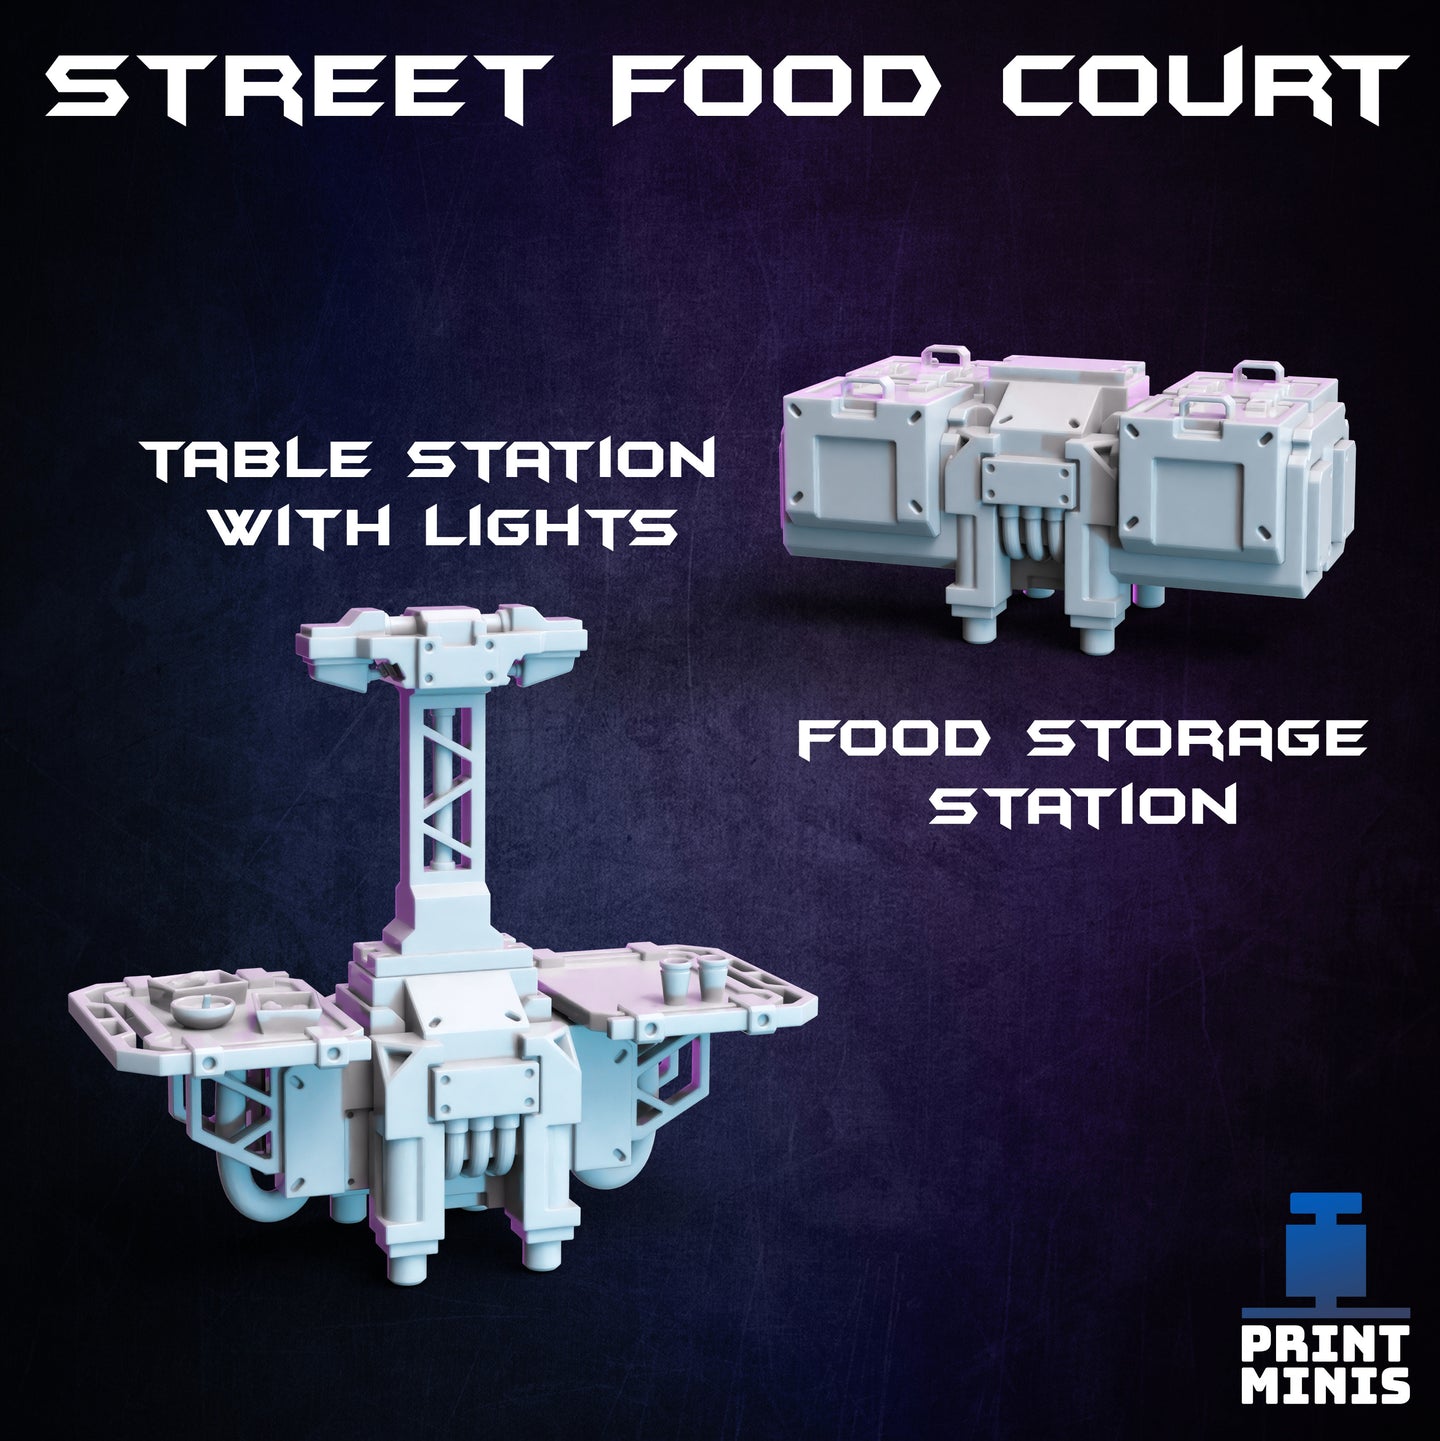 Street Food Court Table Station and Food Storage Set - Night Market - Print Minis - Wargaming D&D DnD